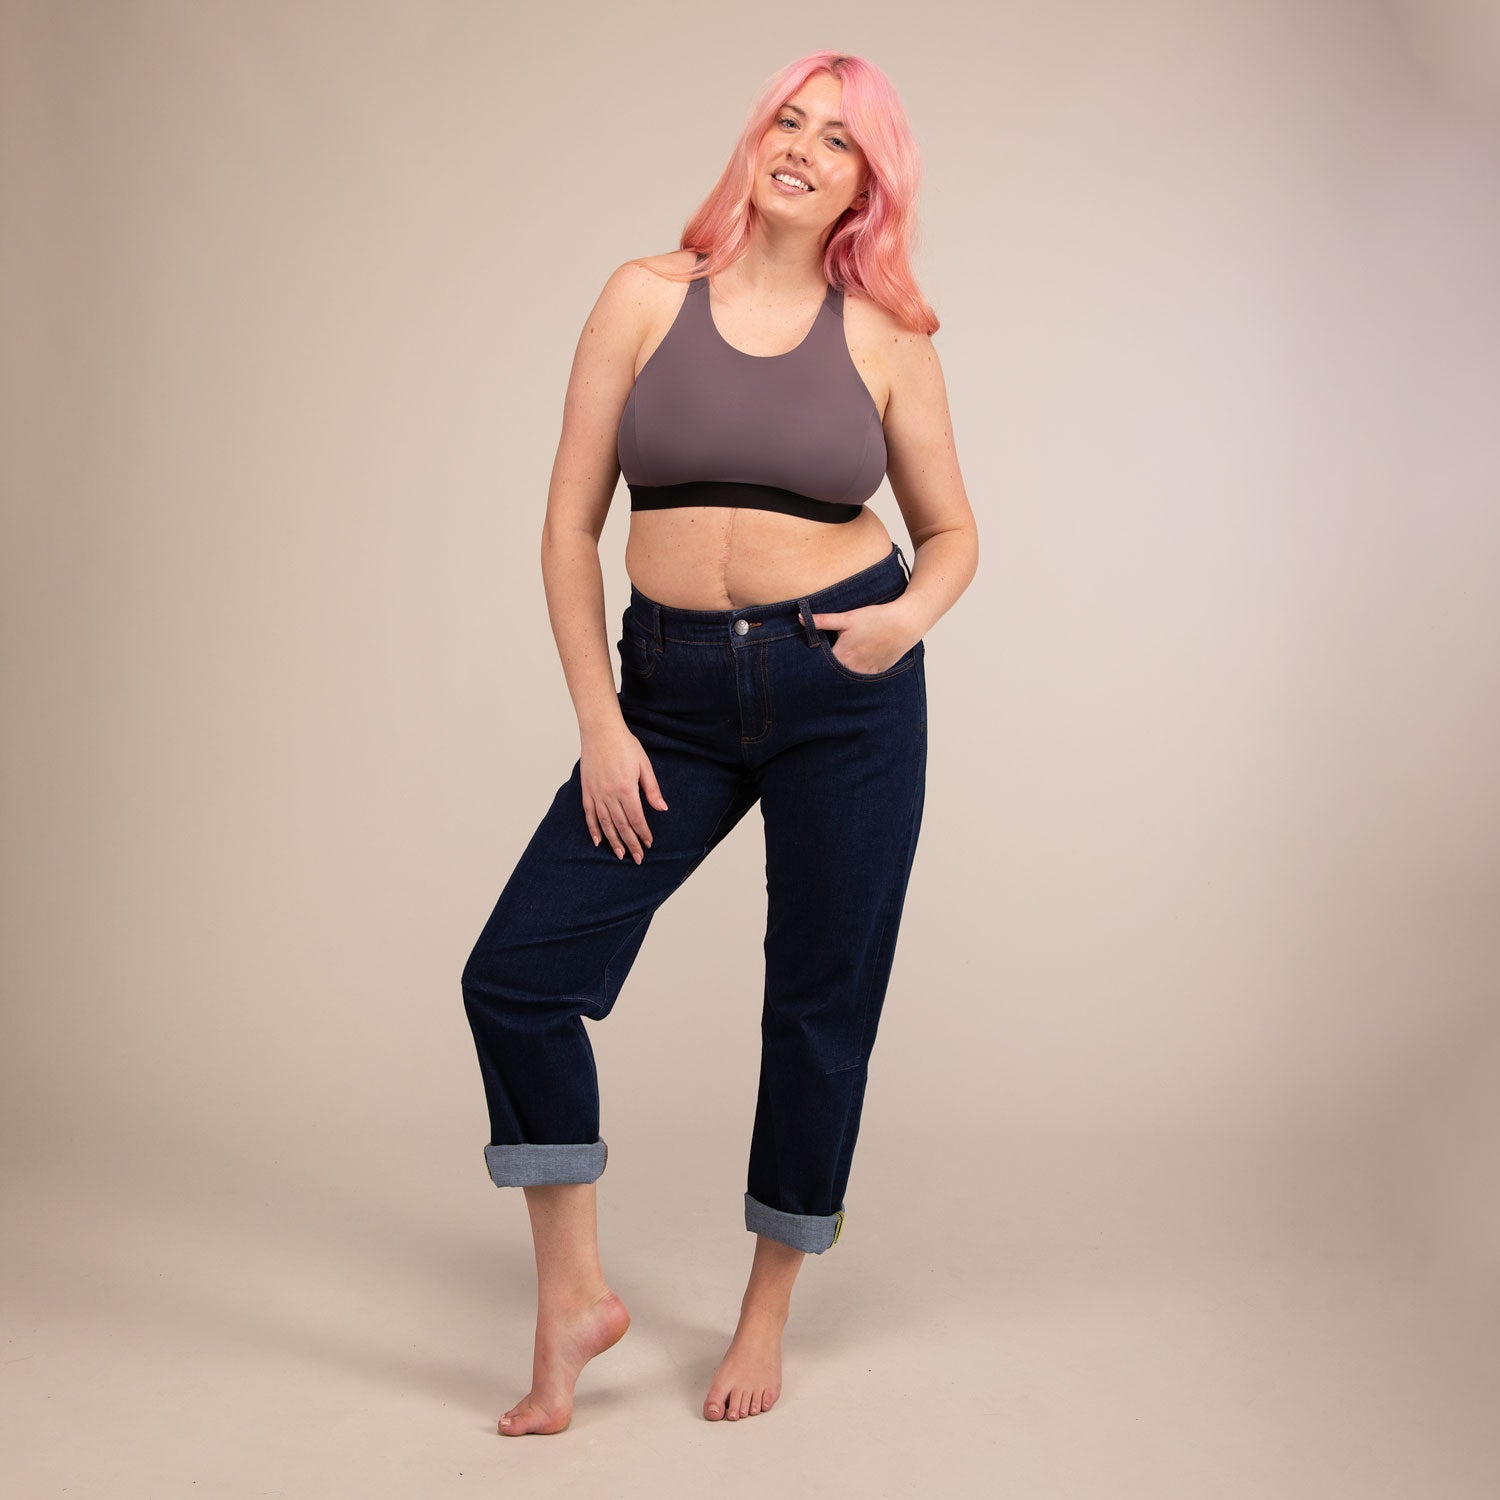 EQUINOX MINIMAL LEOPARD | Reversible Recycled Sports Bra | 3RD ROCK Clothing -  Sophie is a 34G with a 32" underbust, 40.5" overbust and wears a size 16 F